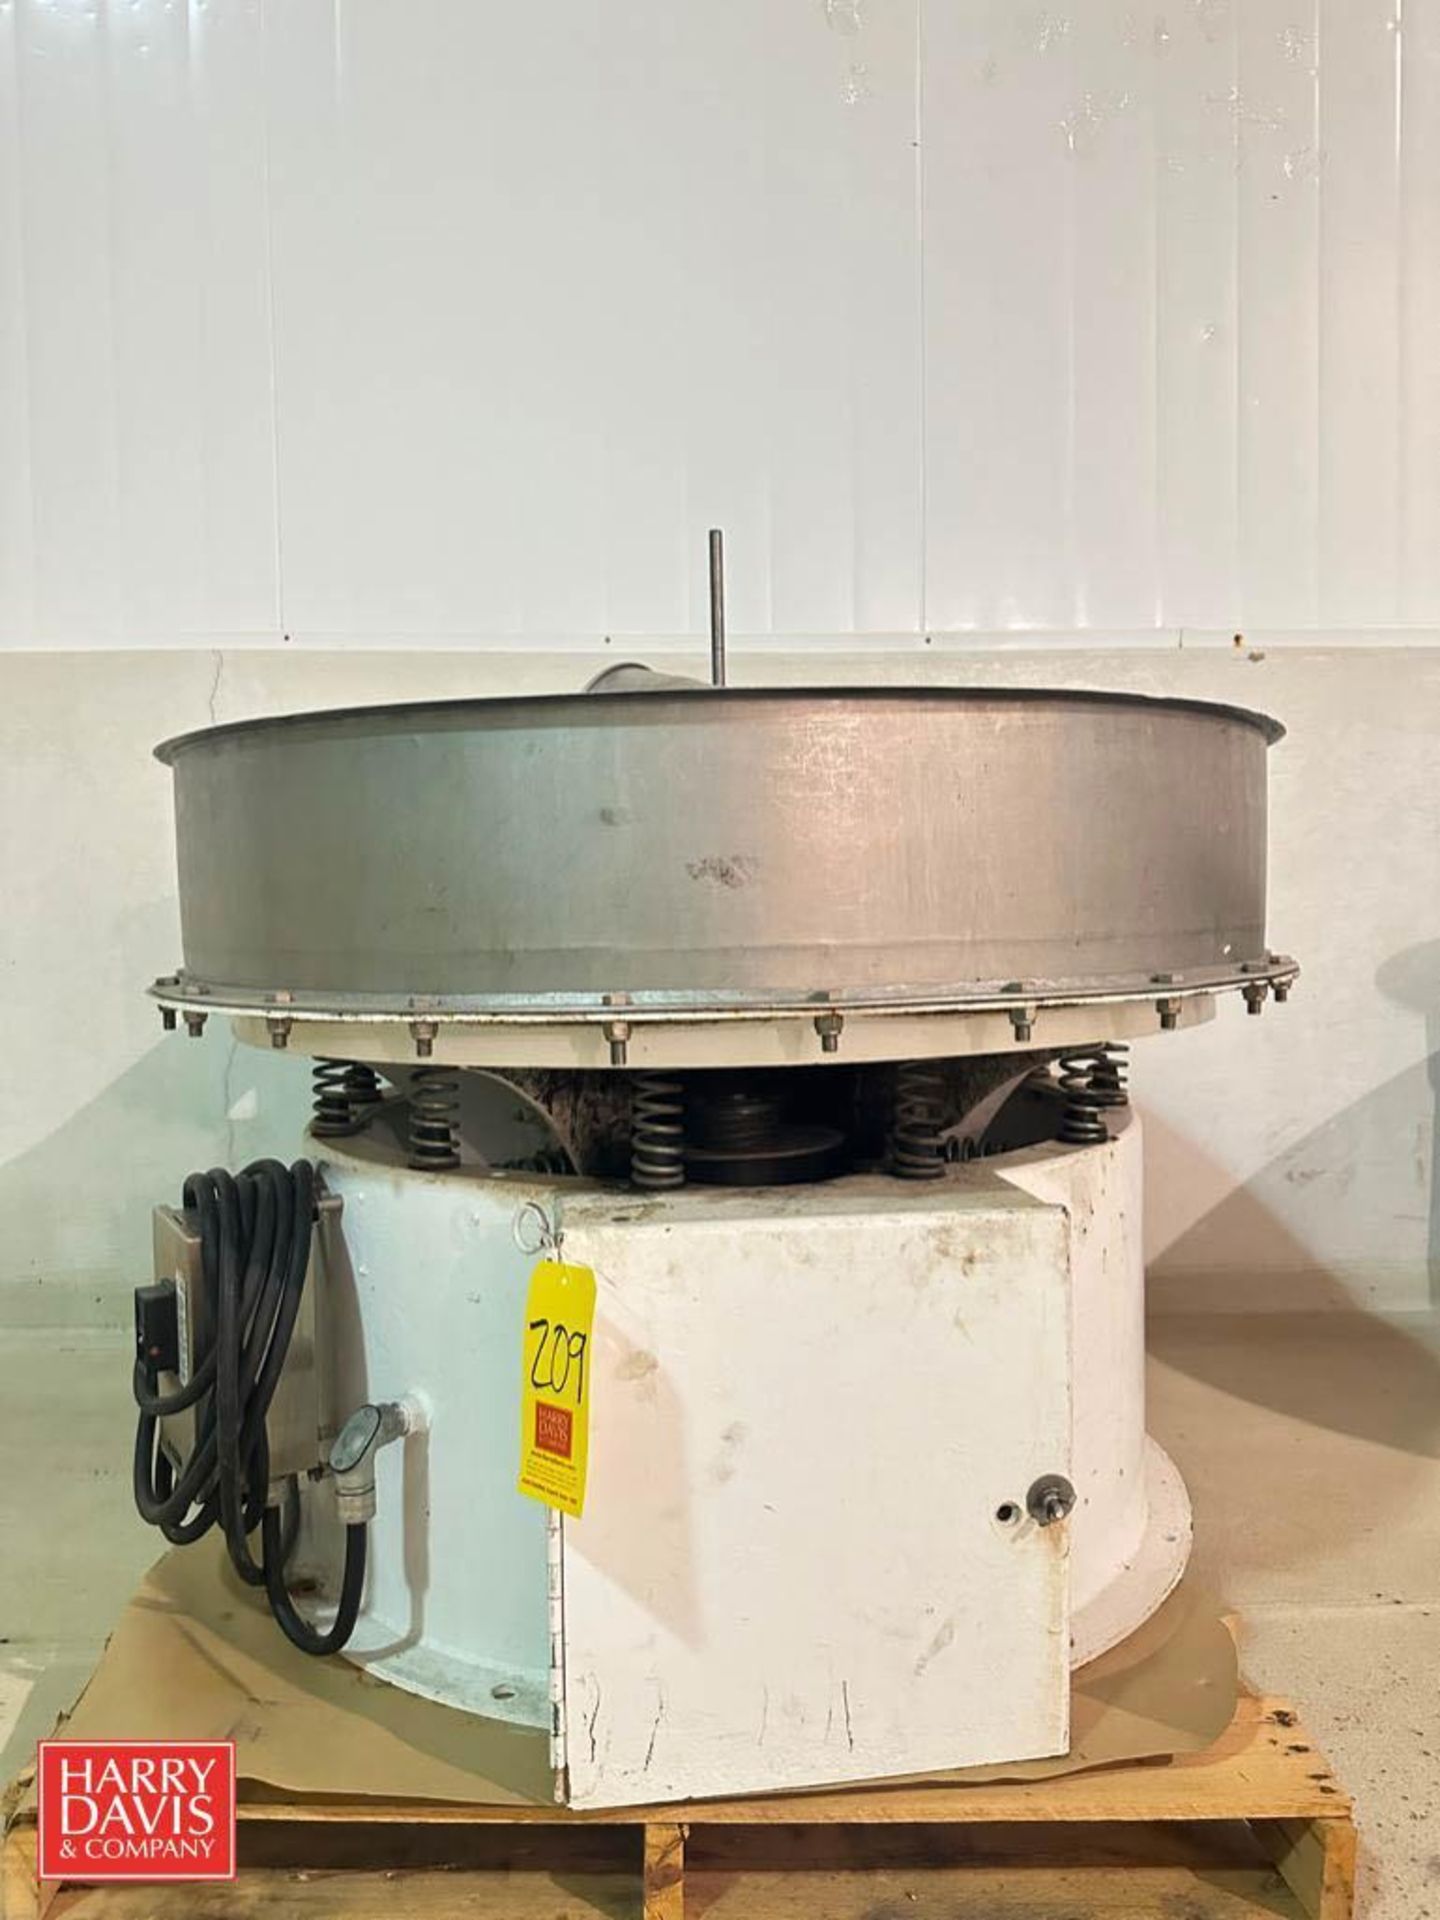 Vibratory Separator: 4' Diameter with Square D Switch